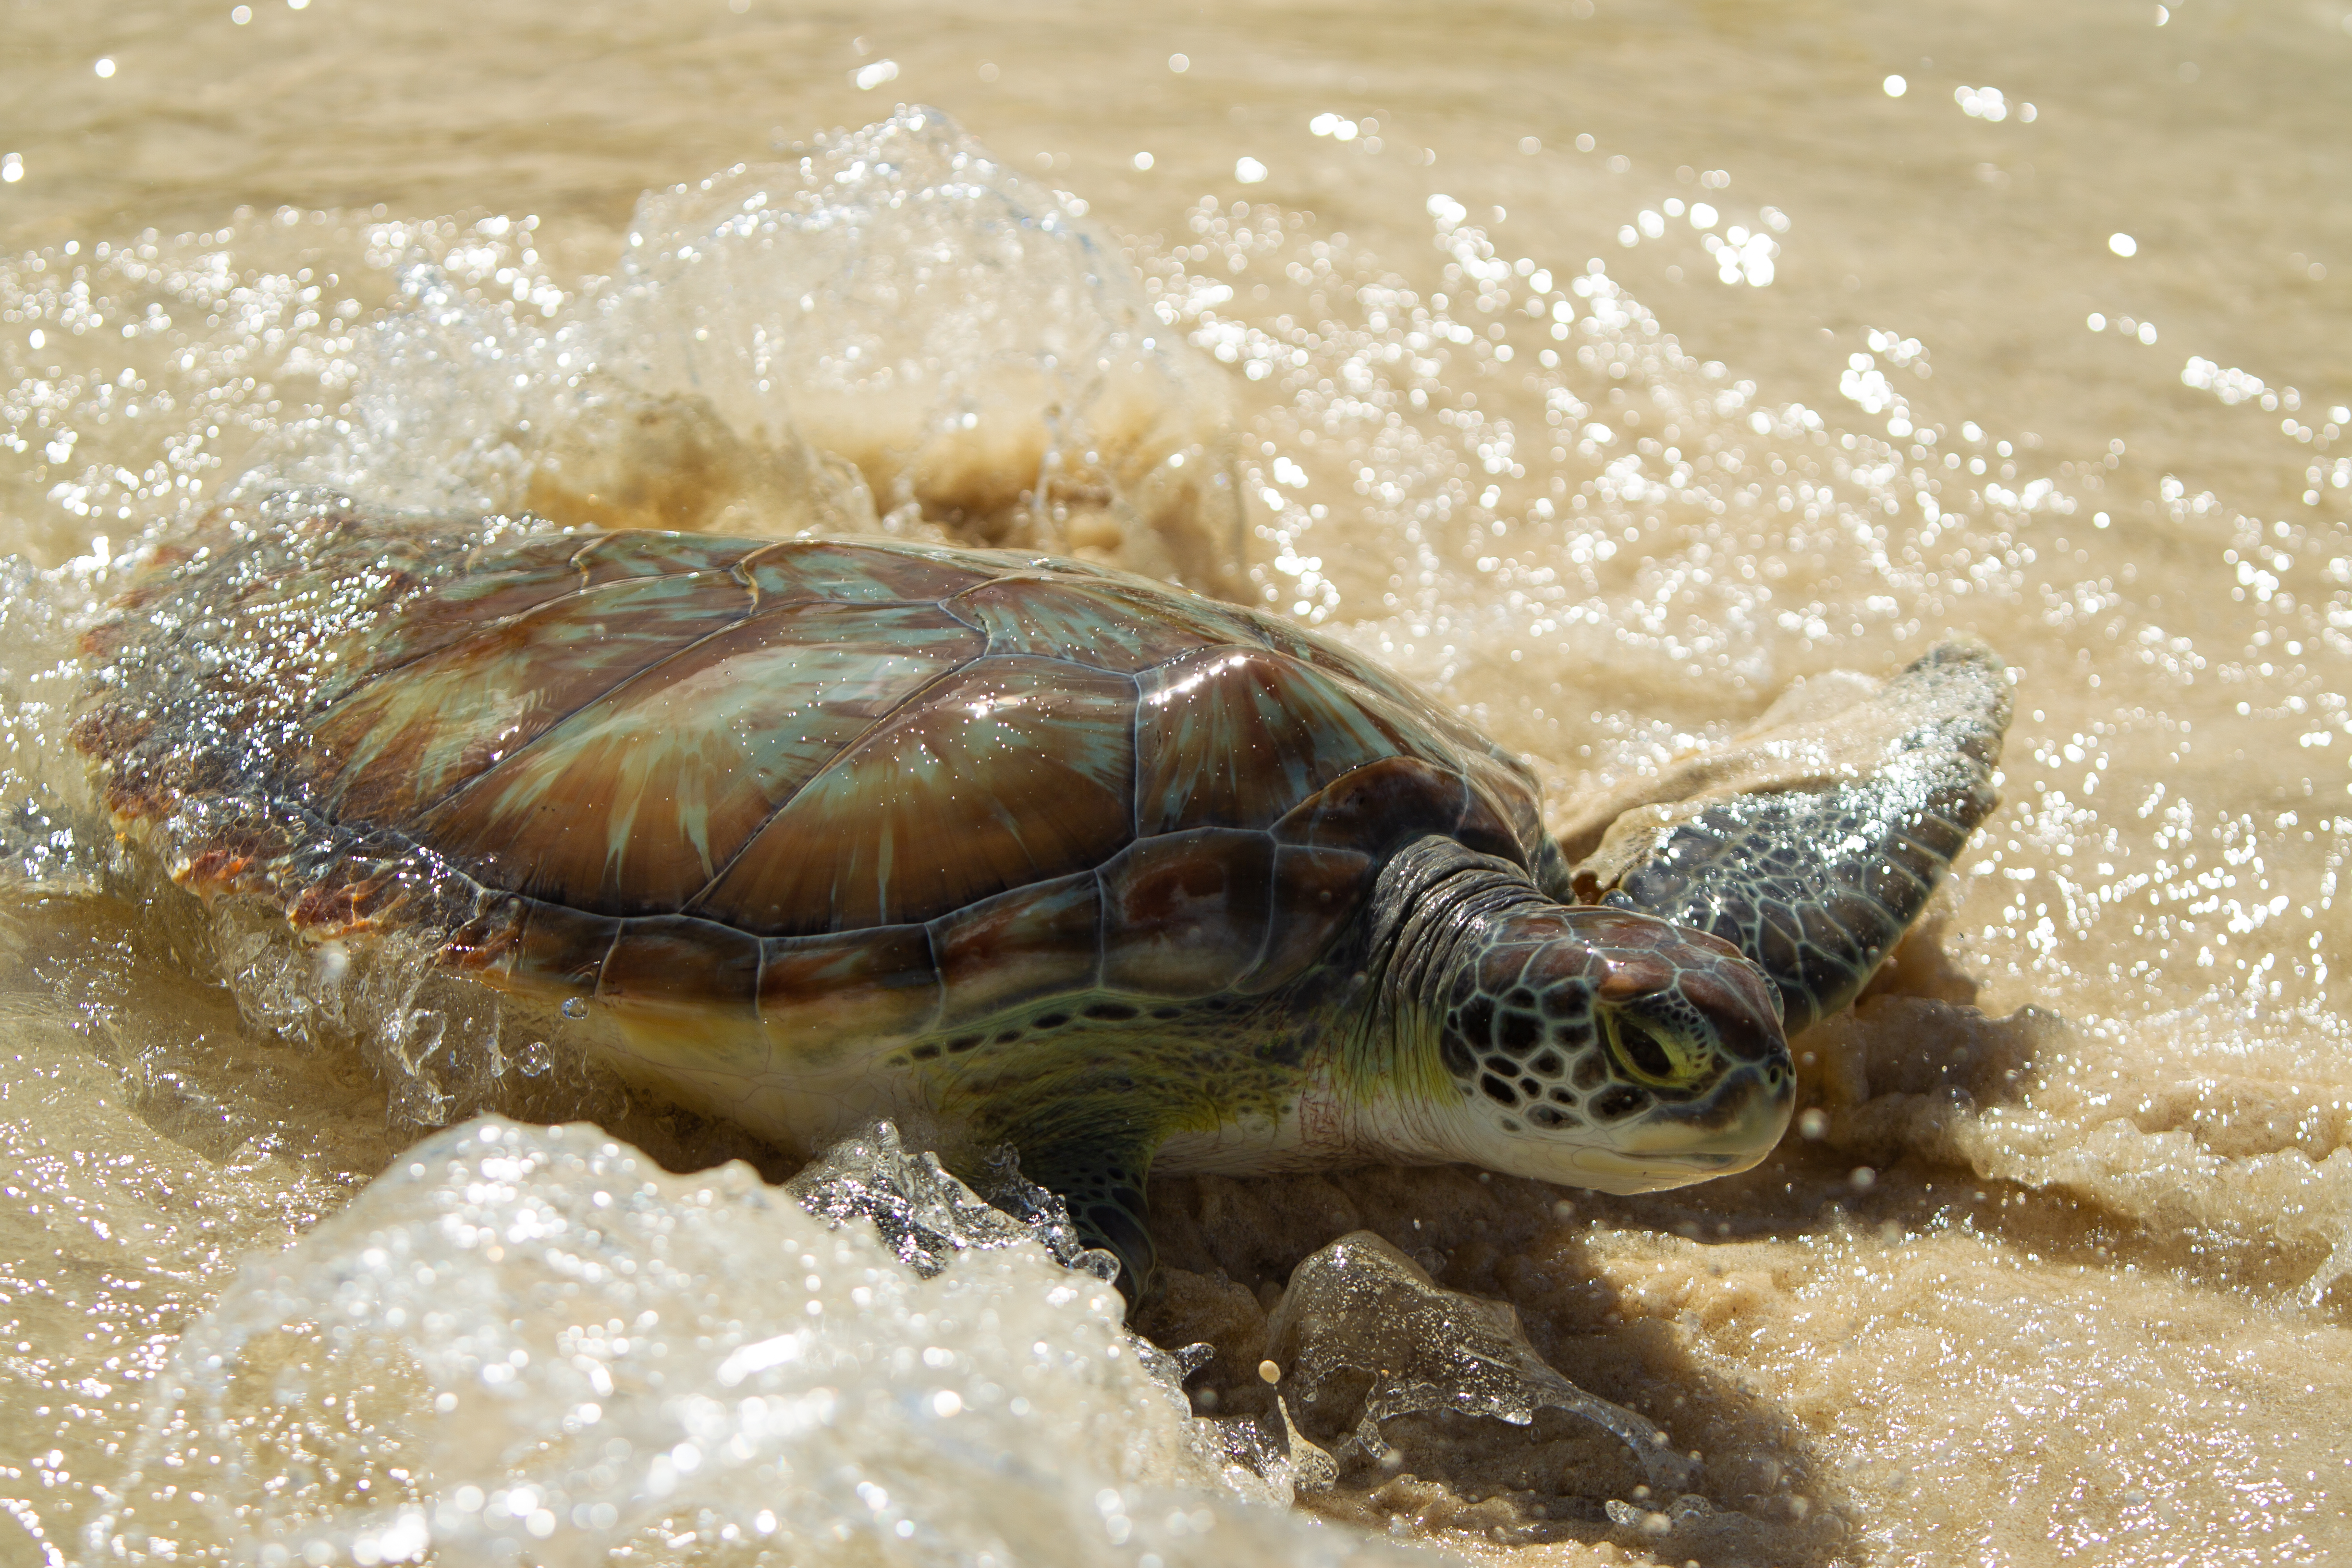 Pirates week 2019 release of head-started Green turtle 001